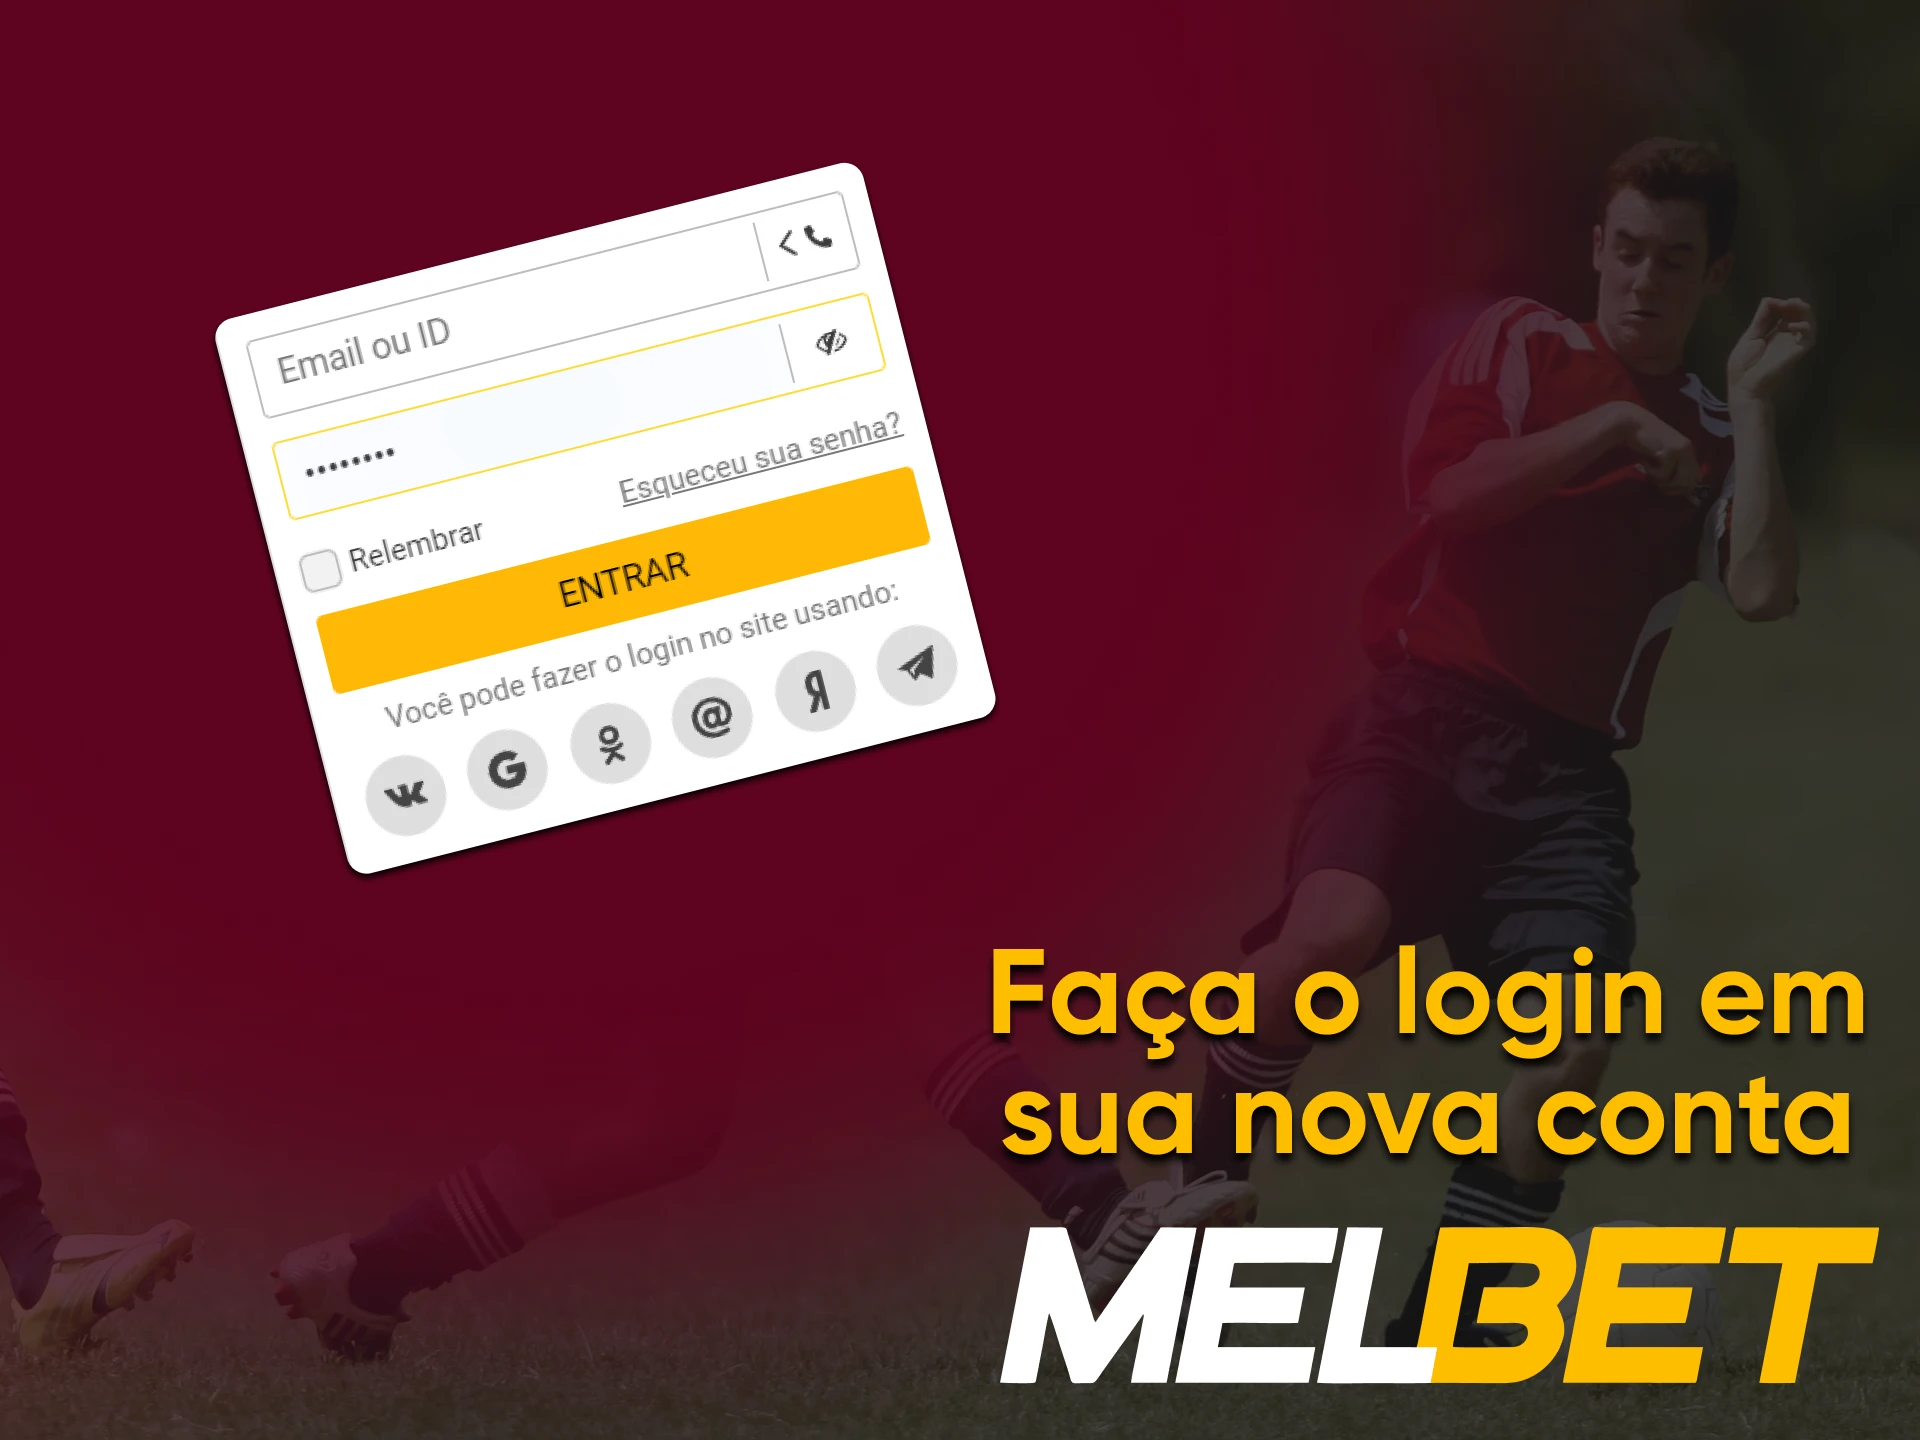 To replenish your account, log in to your Melbet account.